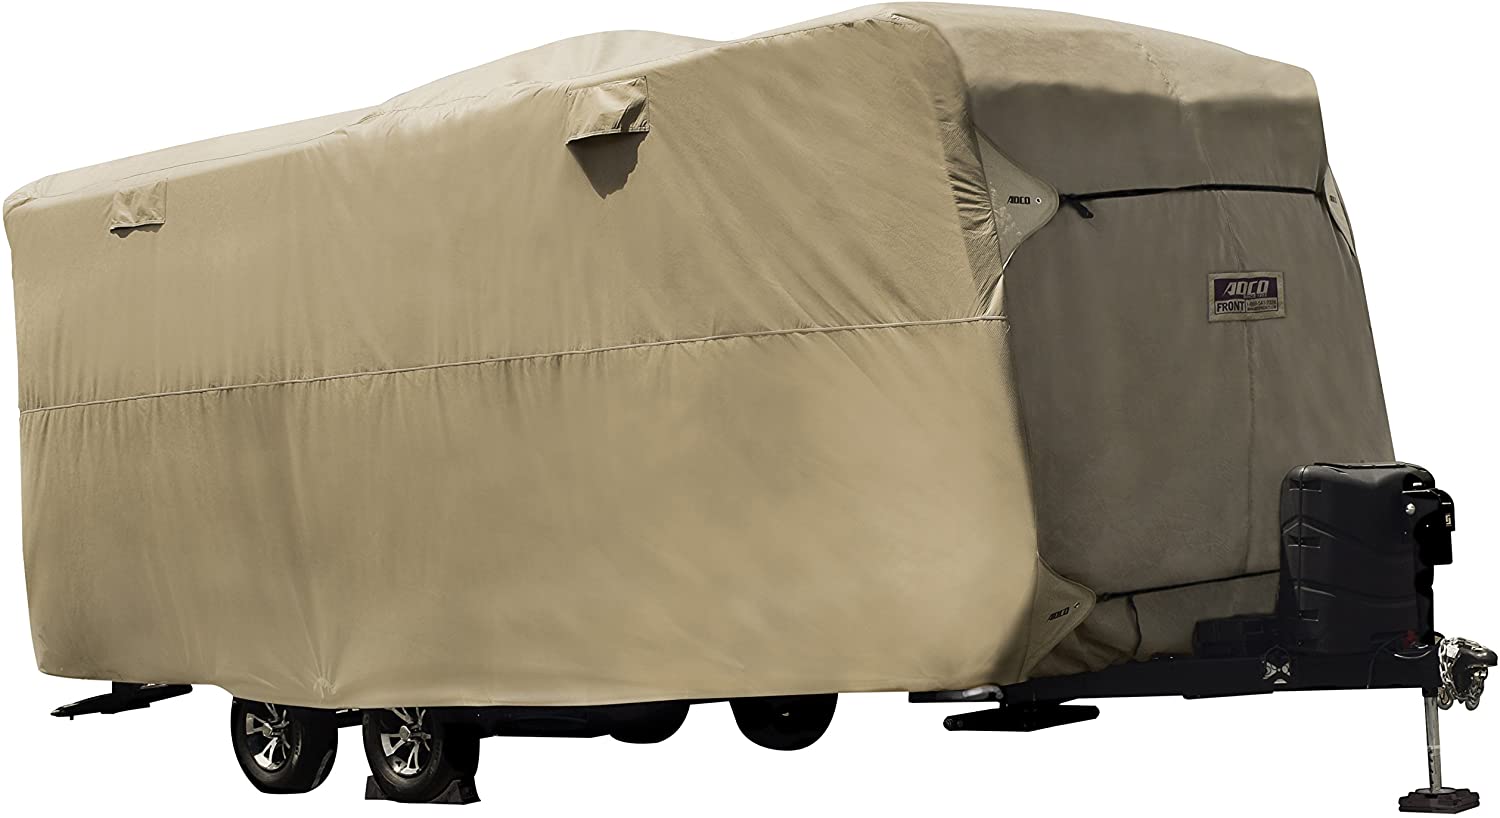 ADCO by Covercraft 74843 Storage Lot Cover for Travel Trailer RV, Fits 24'1